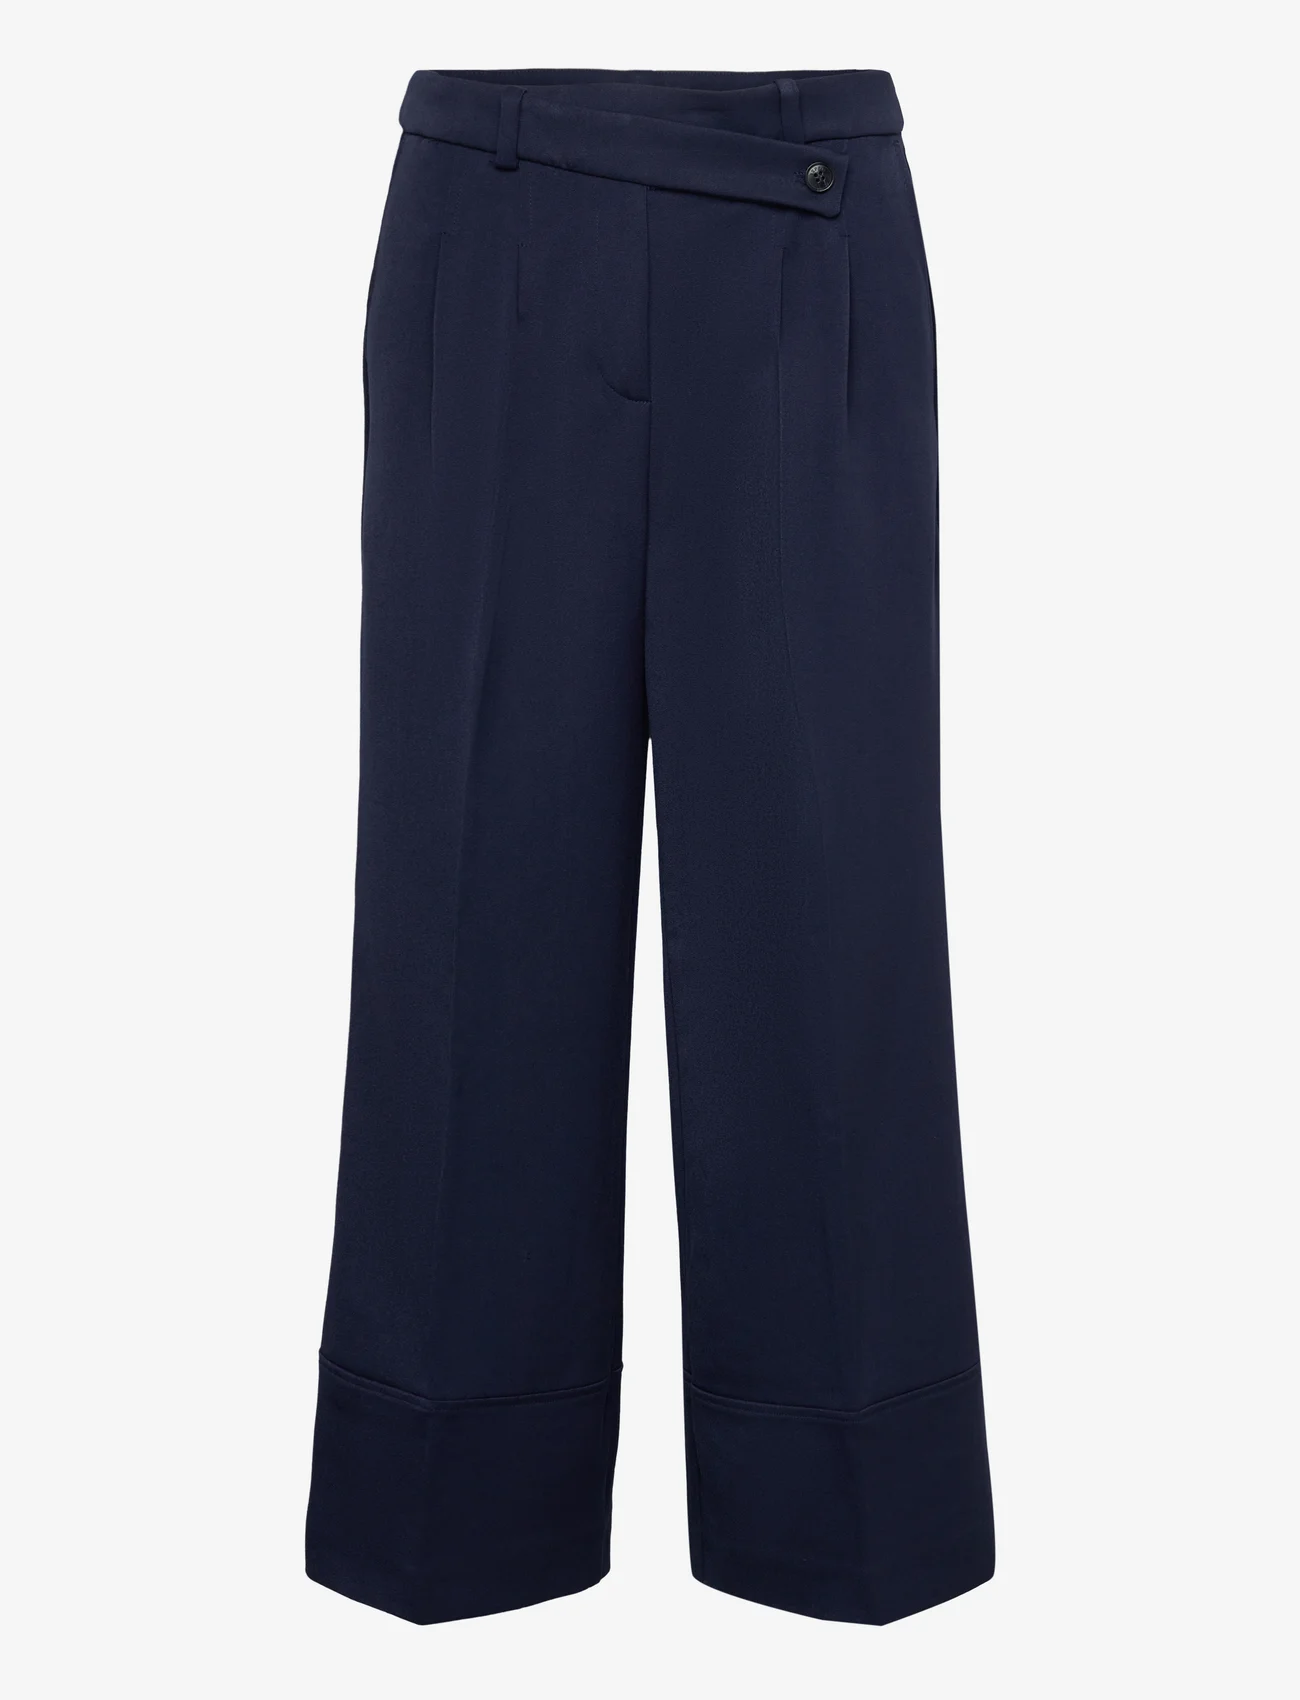 Esprit Casual - Culotte trousers with blended viscose - spodnie proste - navy - 0